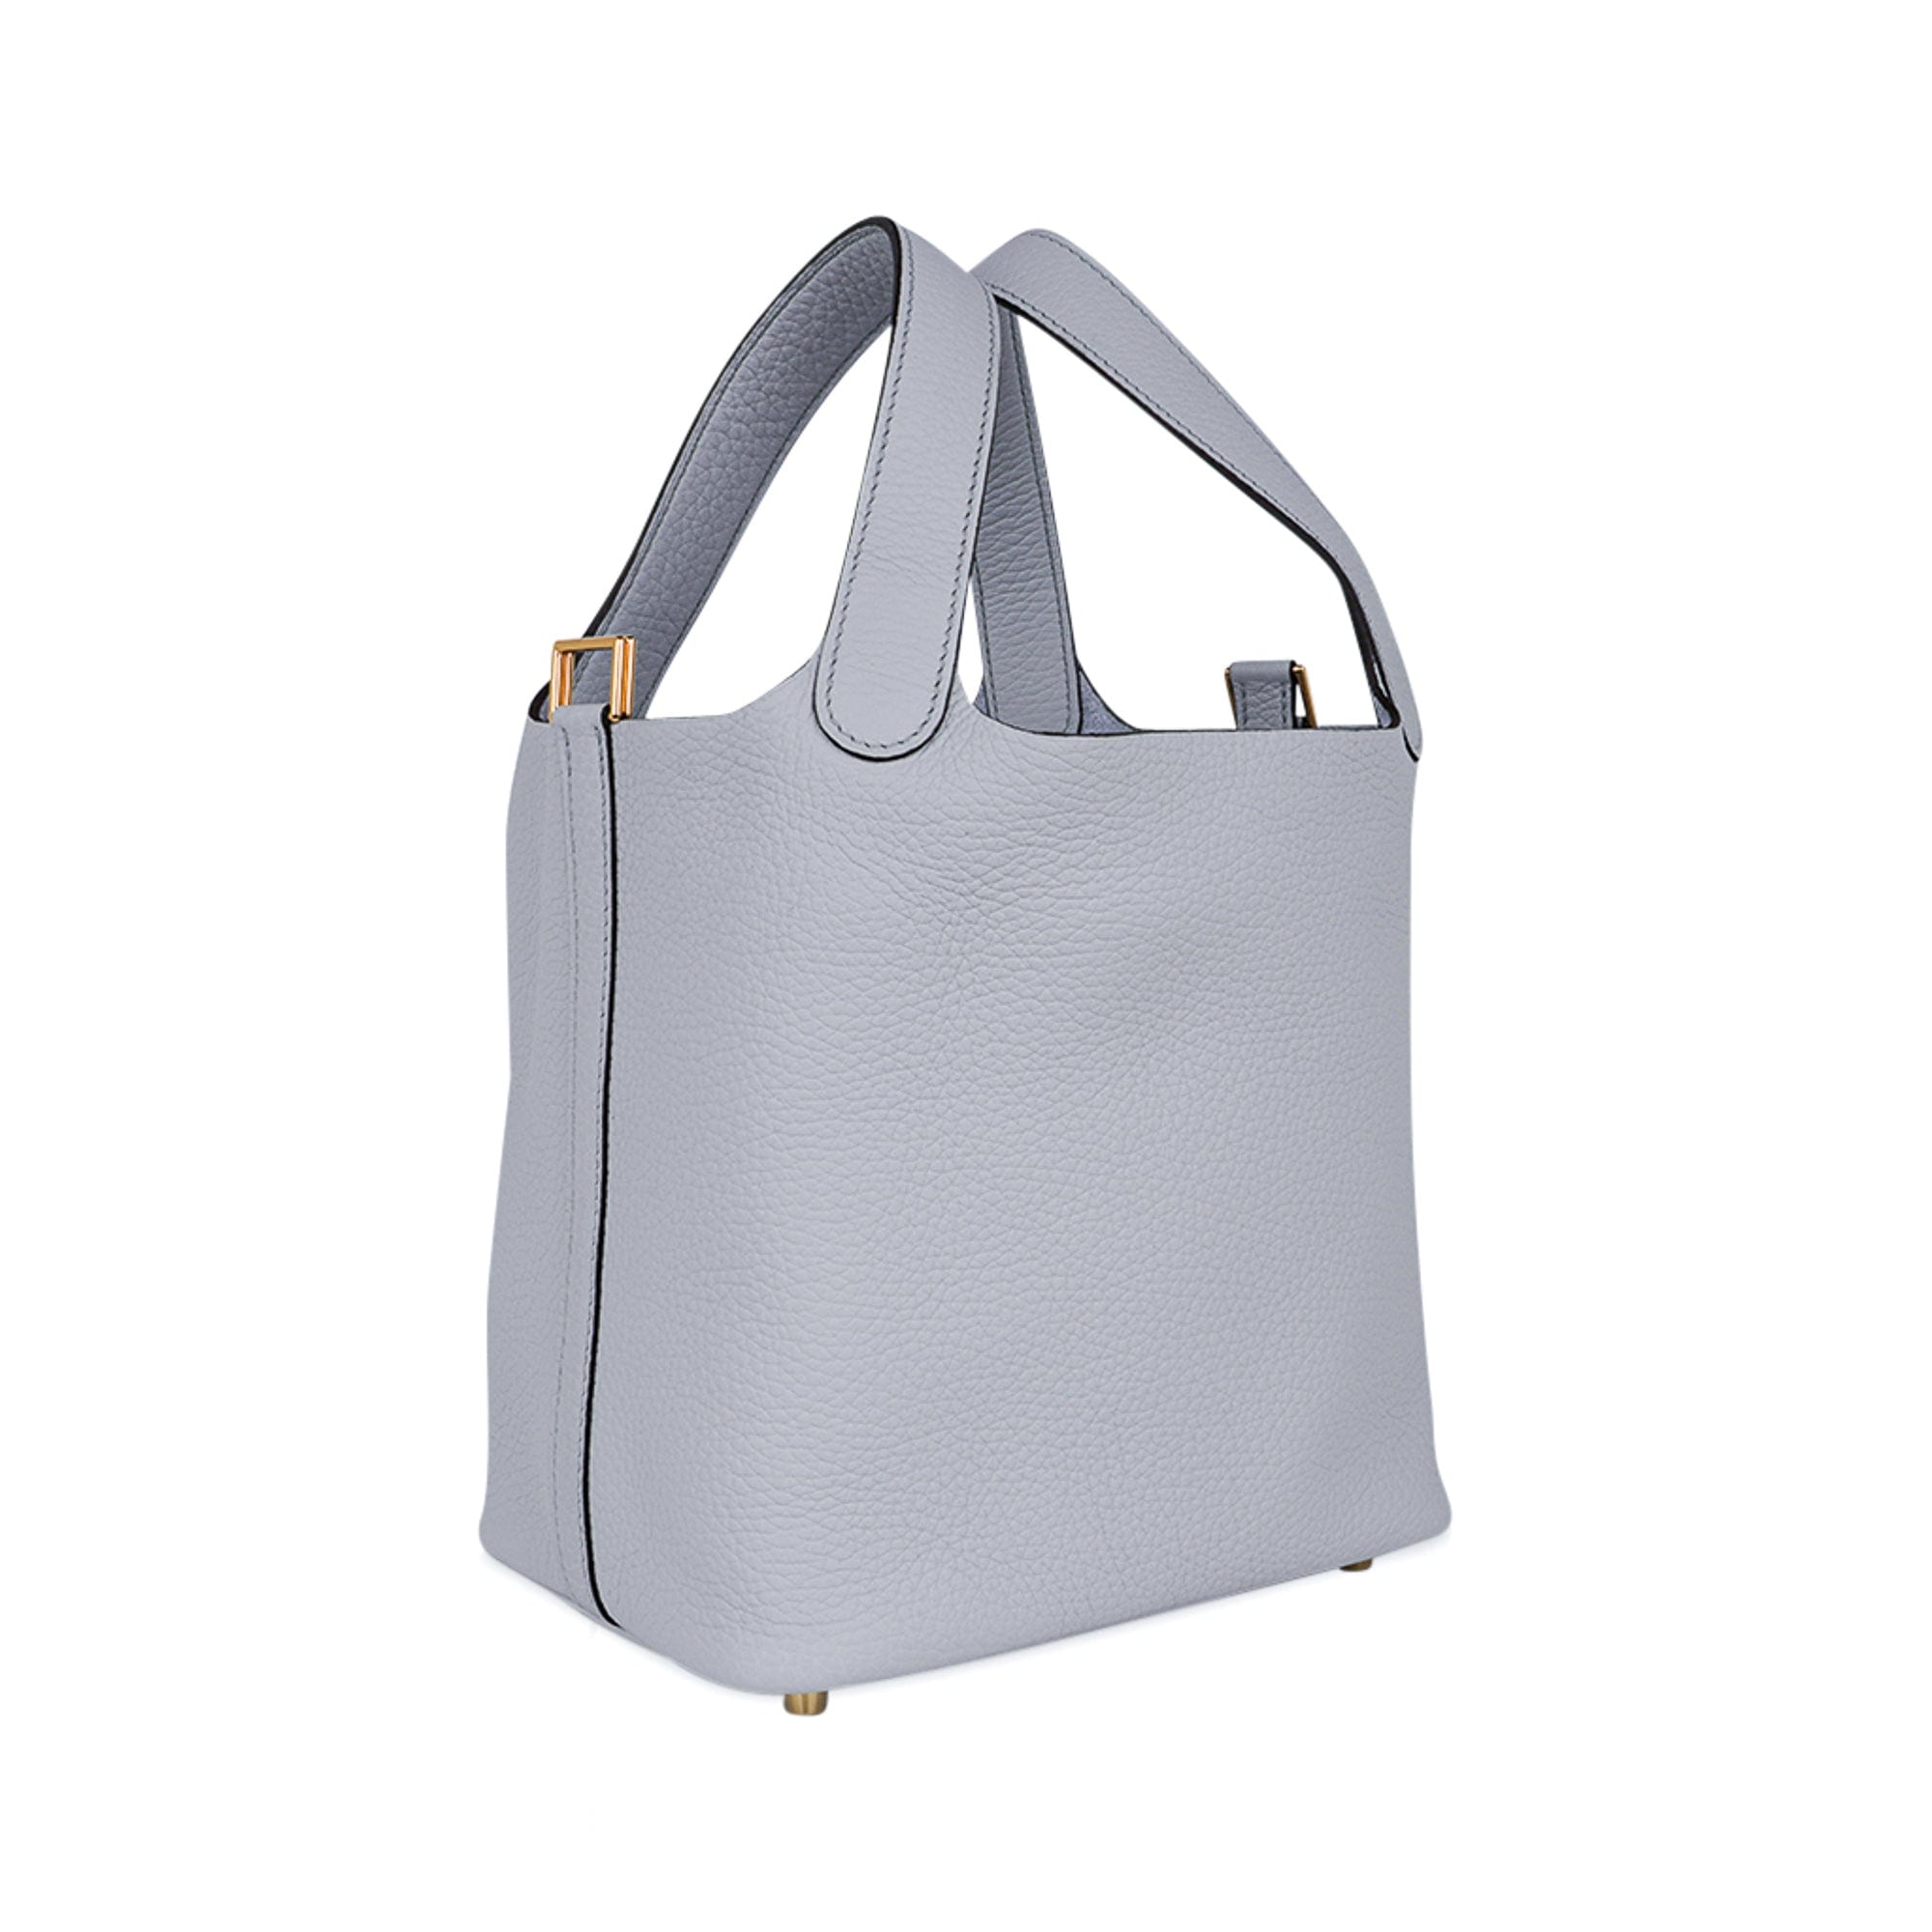 Hermes Picotin Lock 18 Tote Bag in Bleu Pale Clemence with Gold Hardware -  ShopStyle